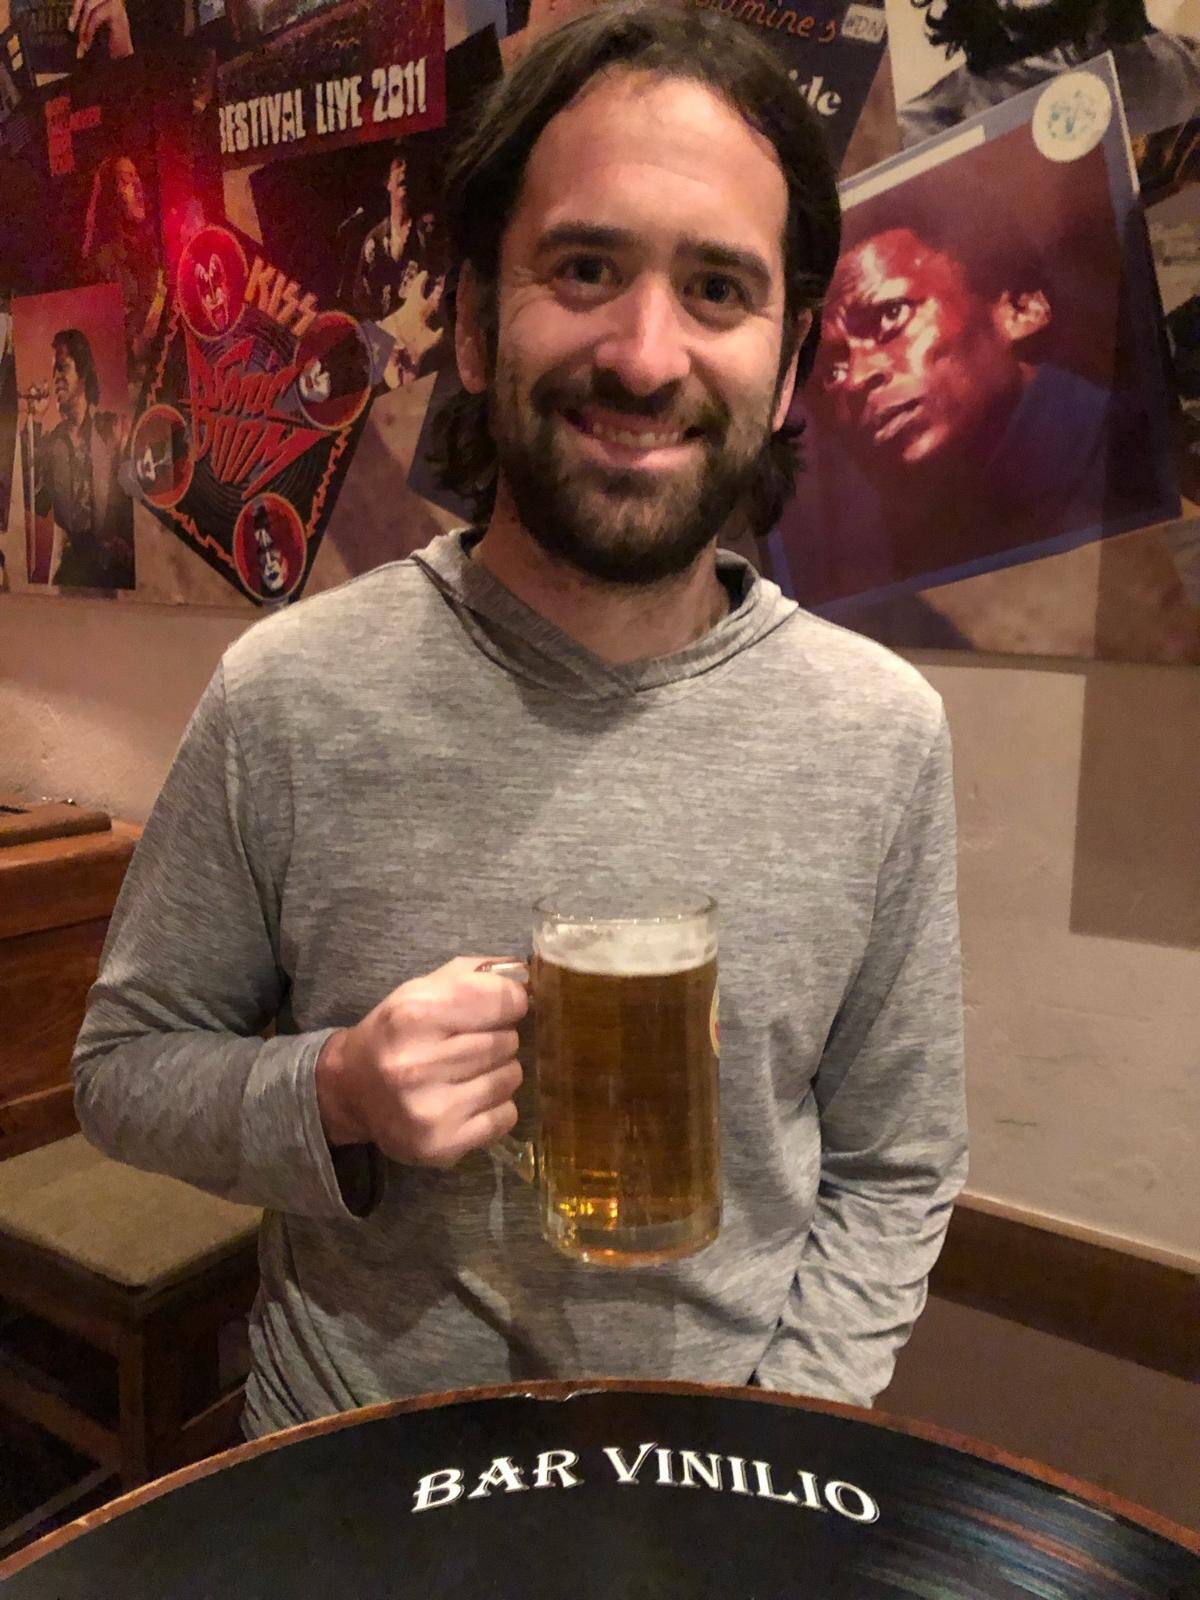 Thanks Luke C.! You helped purchase us our last rounds of 2019 in Ioannina, Greece! All we understood was Amstel so that's what we rung in the New Year with. 